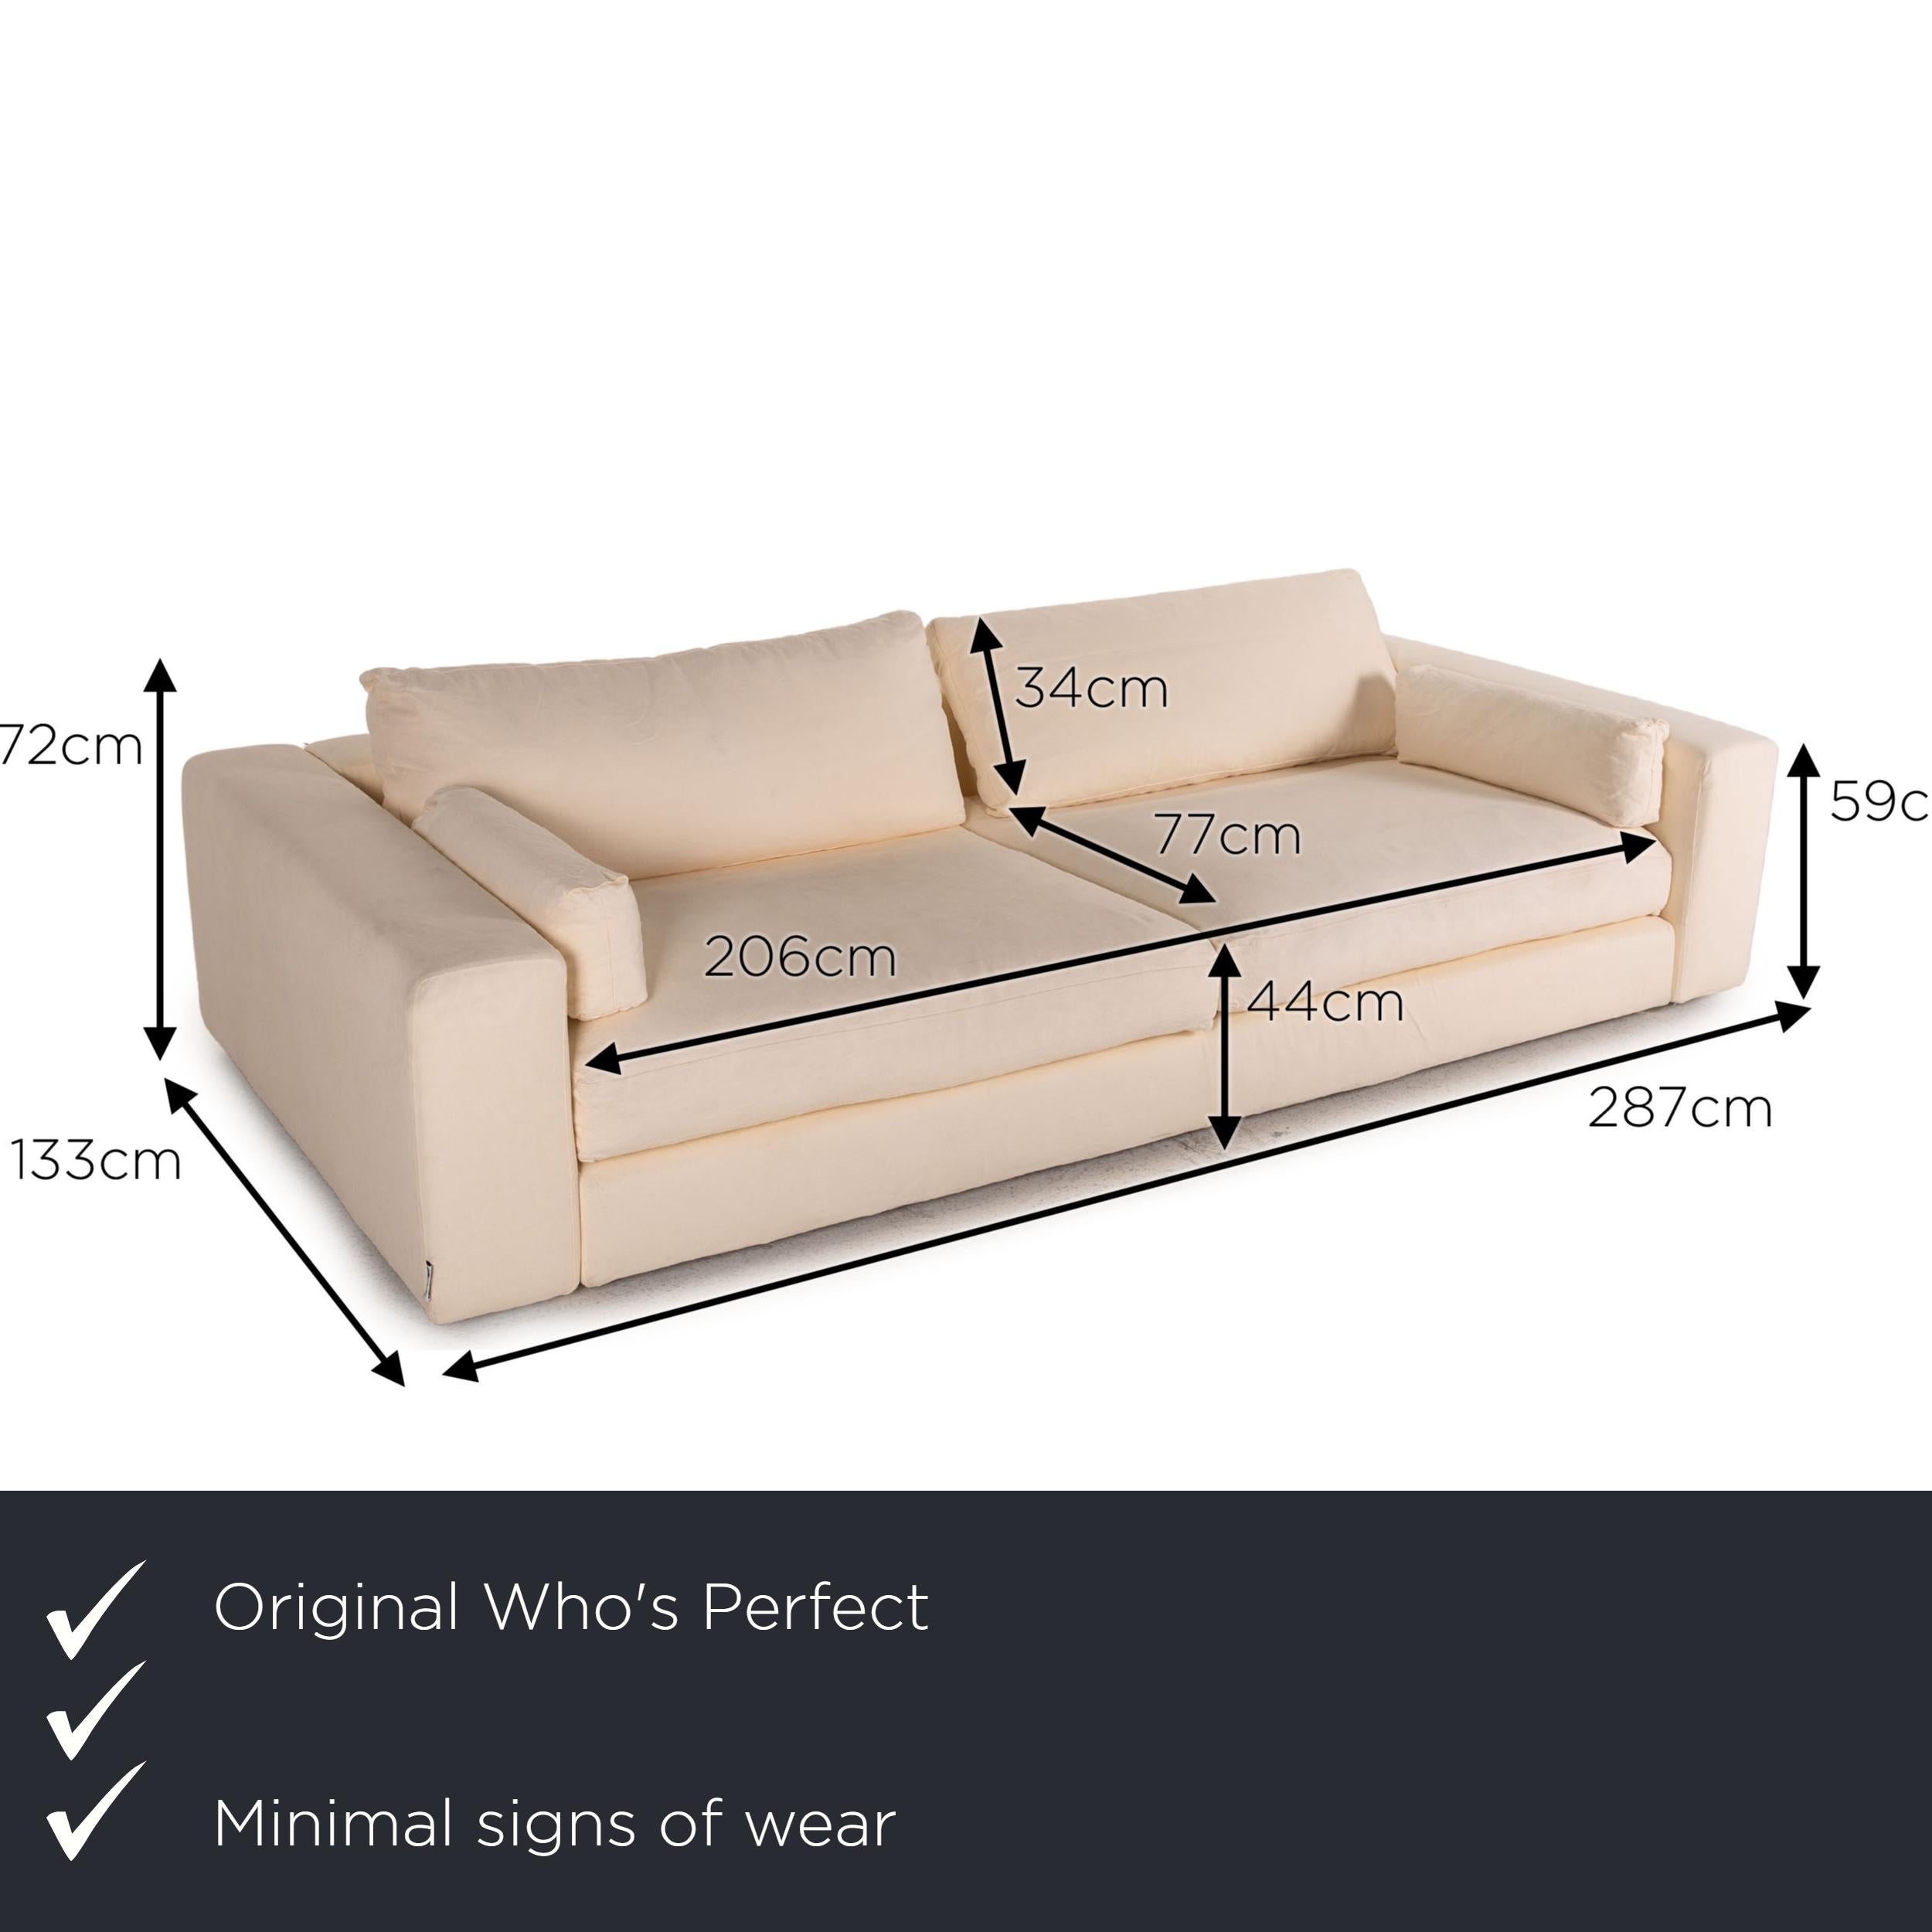 We present to you a who's perfect summer fabric sofa cream four seater couch.
  
 

 Product measurements in centimeters:
 

 depth: 133
 width: 287
 height: 72
 seat height: 44
 rest height: 59
 seat depth: 77
 seat width: 206
 back